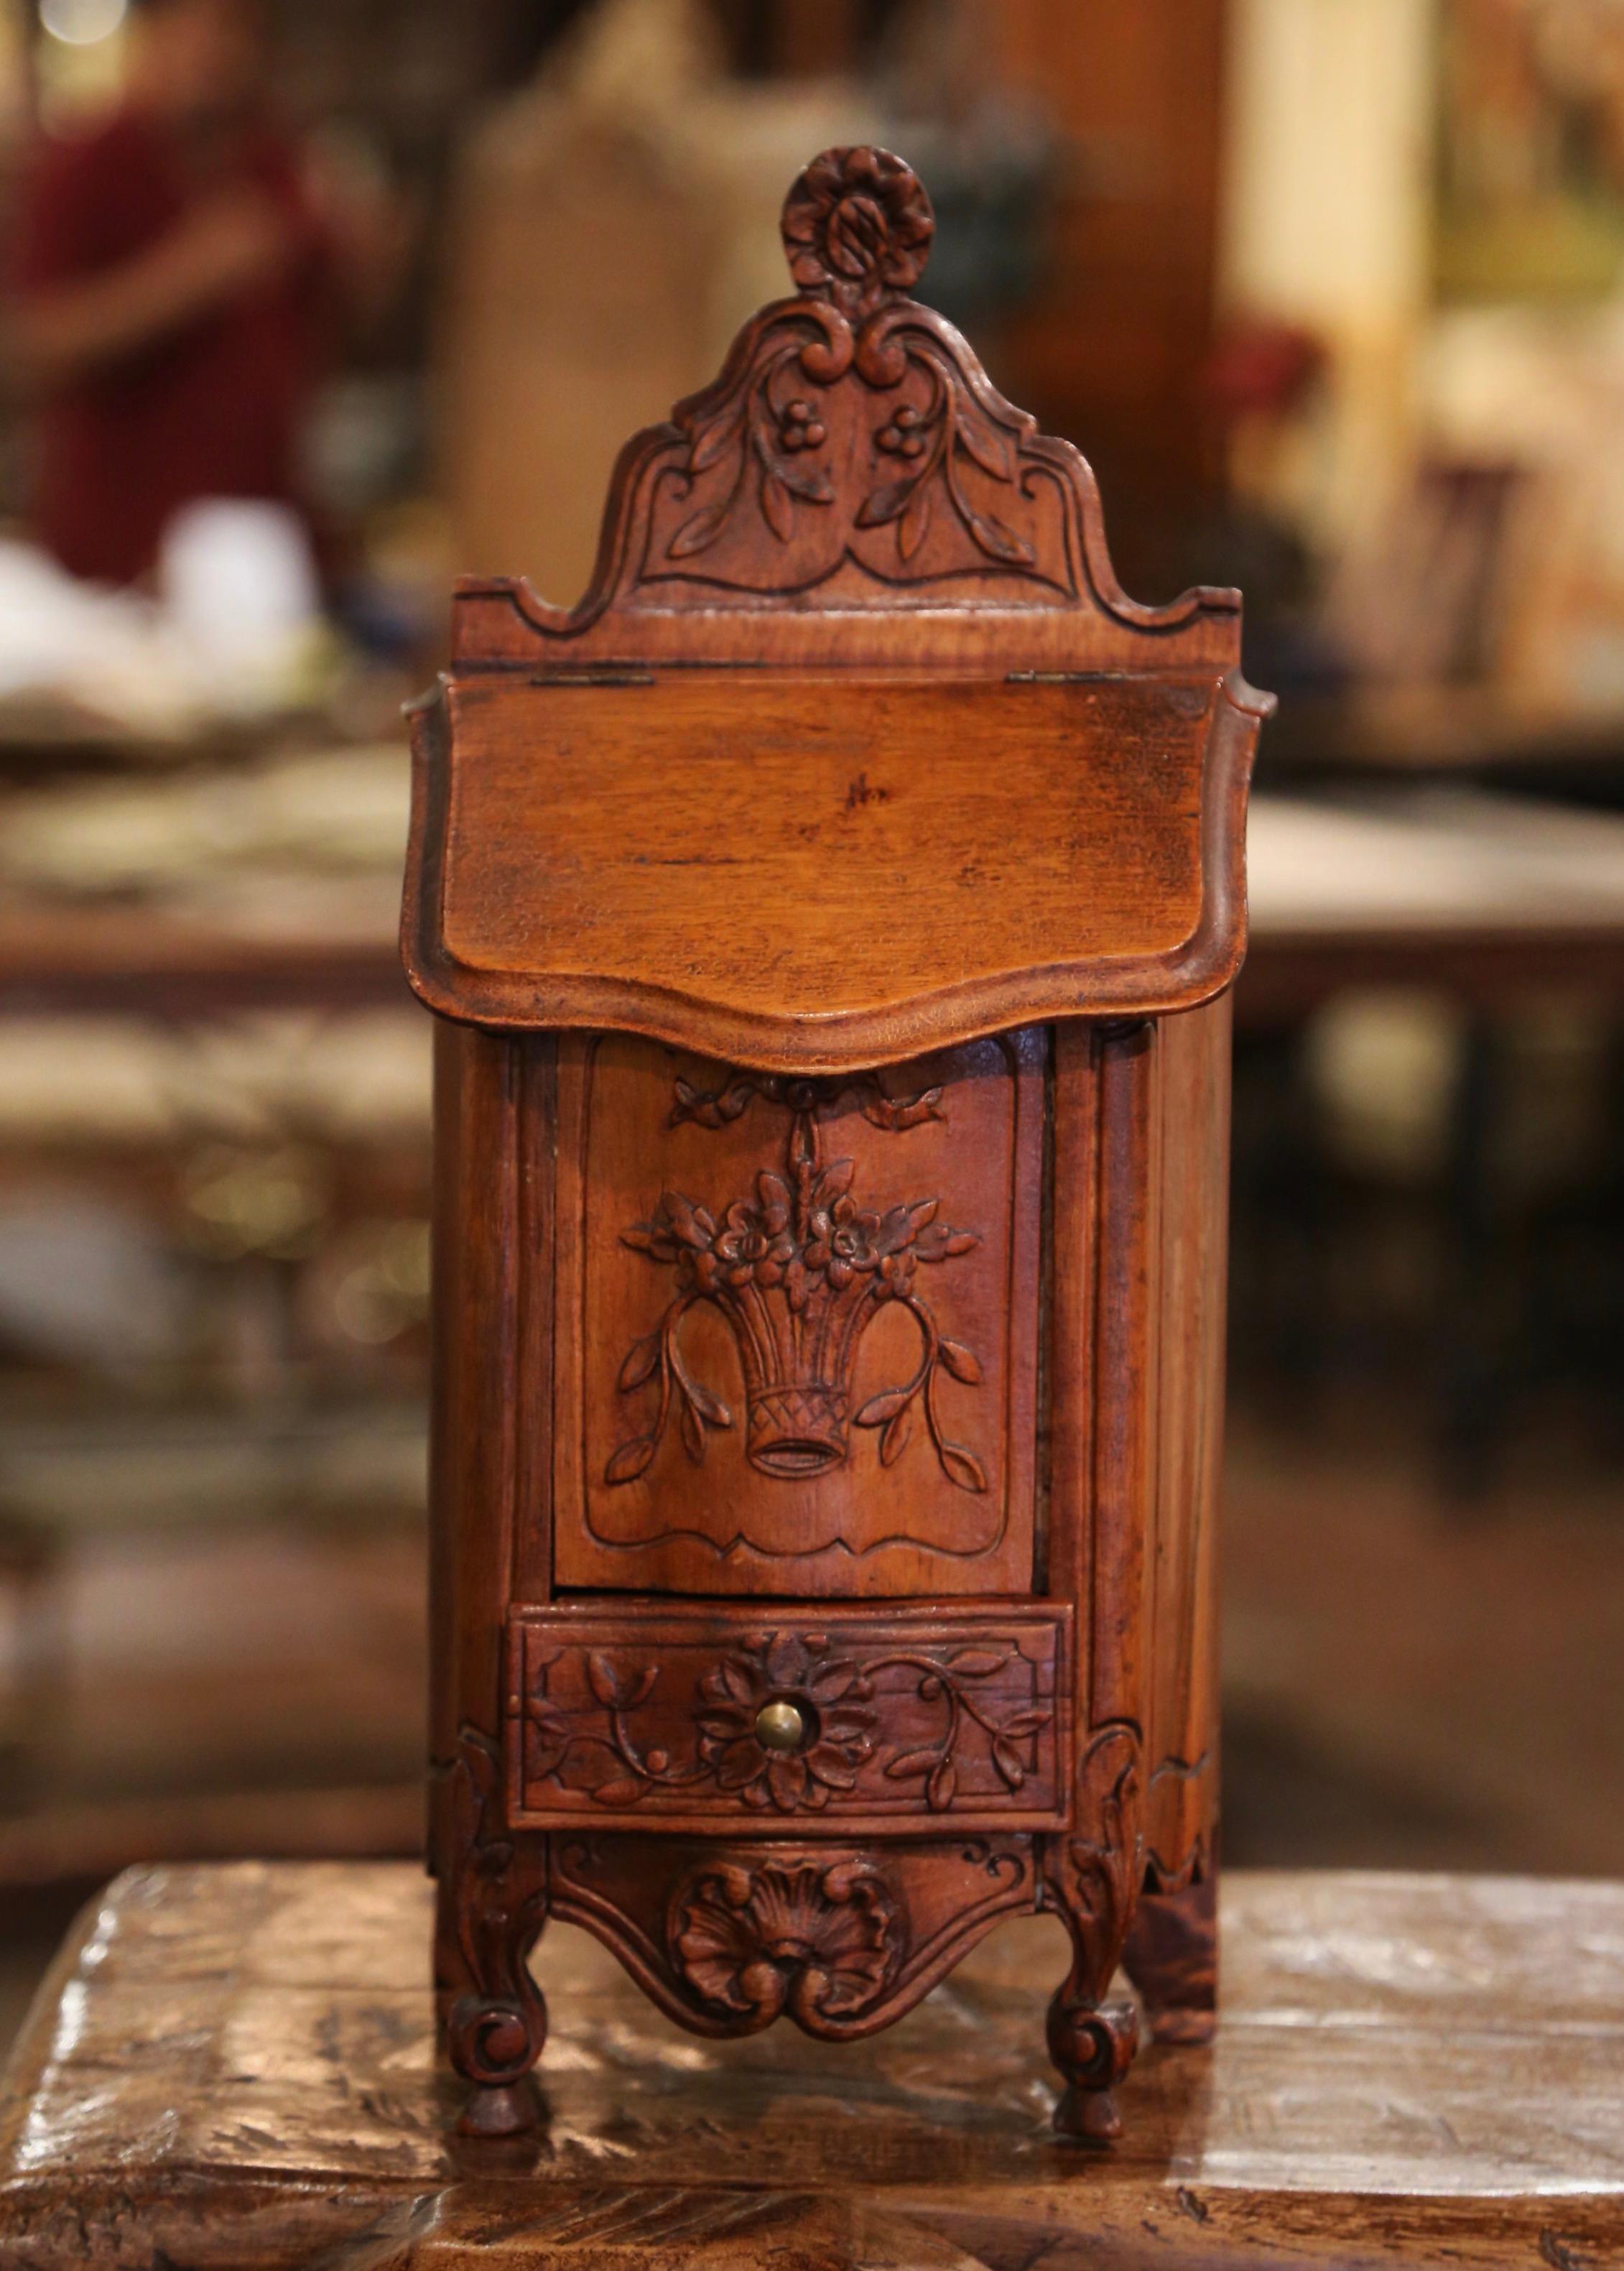 This elegant, antique fruitwood salt box was crafted in southern, France, circa 1920. The ornate, decorative, walnut box sits on delicate escargot feet over a scalloped apron decorated with a shell motif; it features beautiful carvings throughout